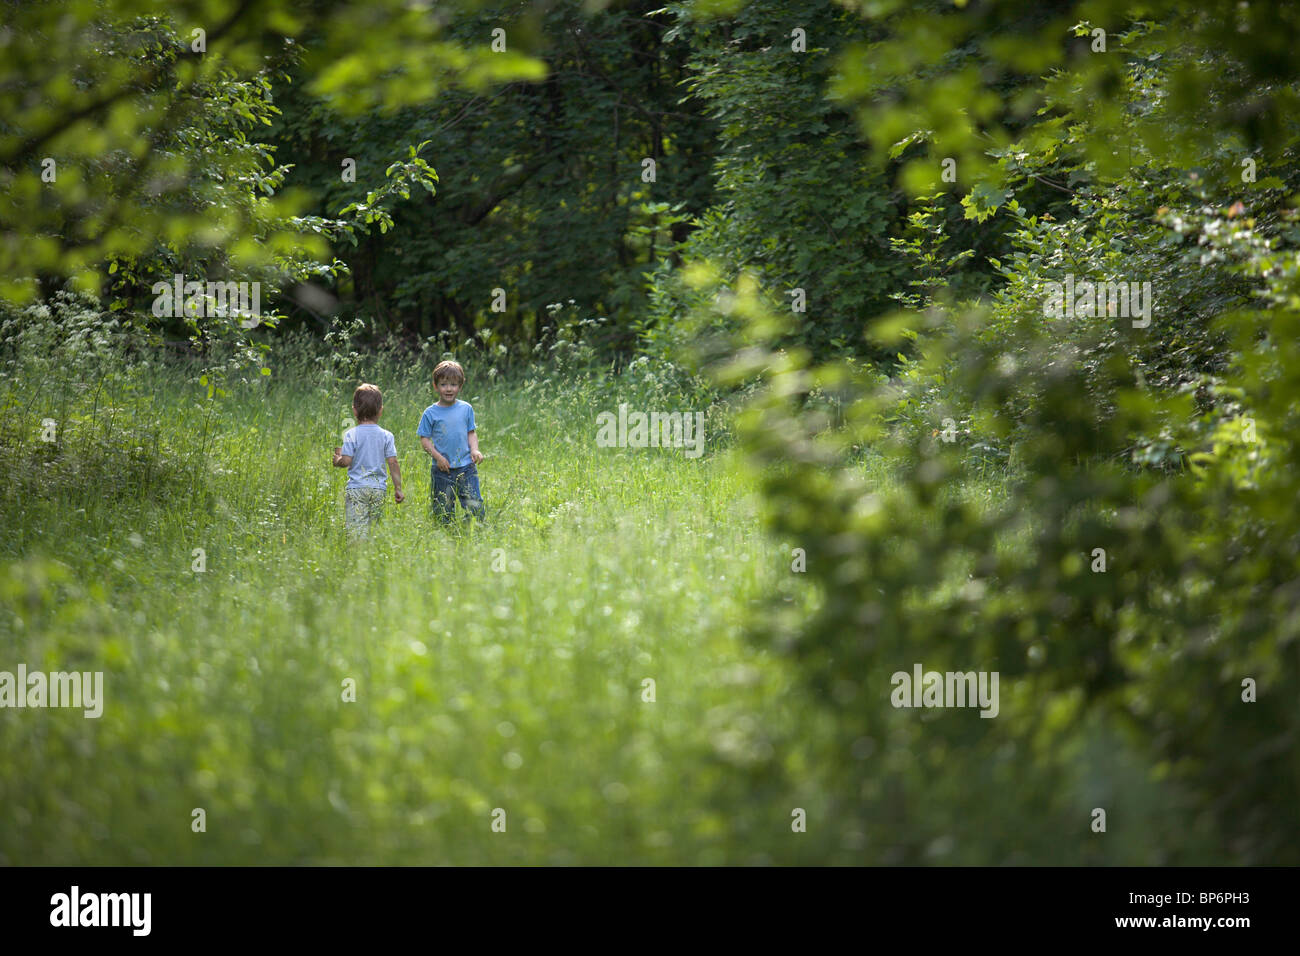 Two young boys outdoors in summer Stock Photo